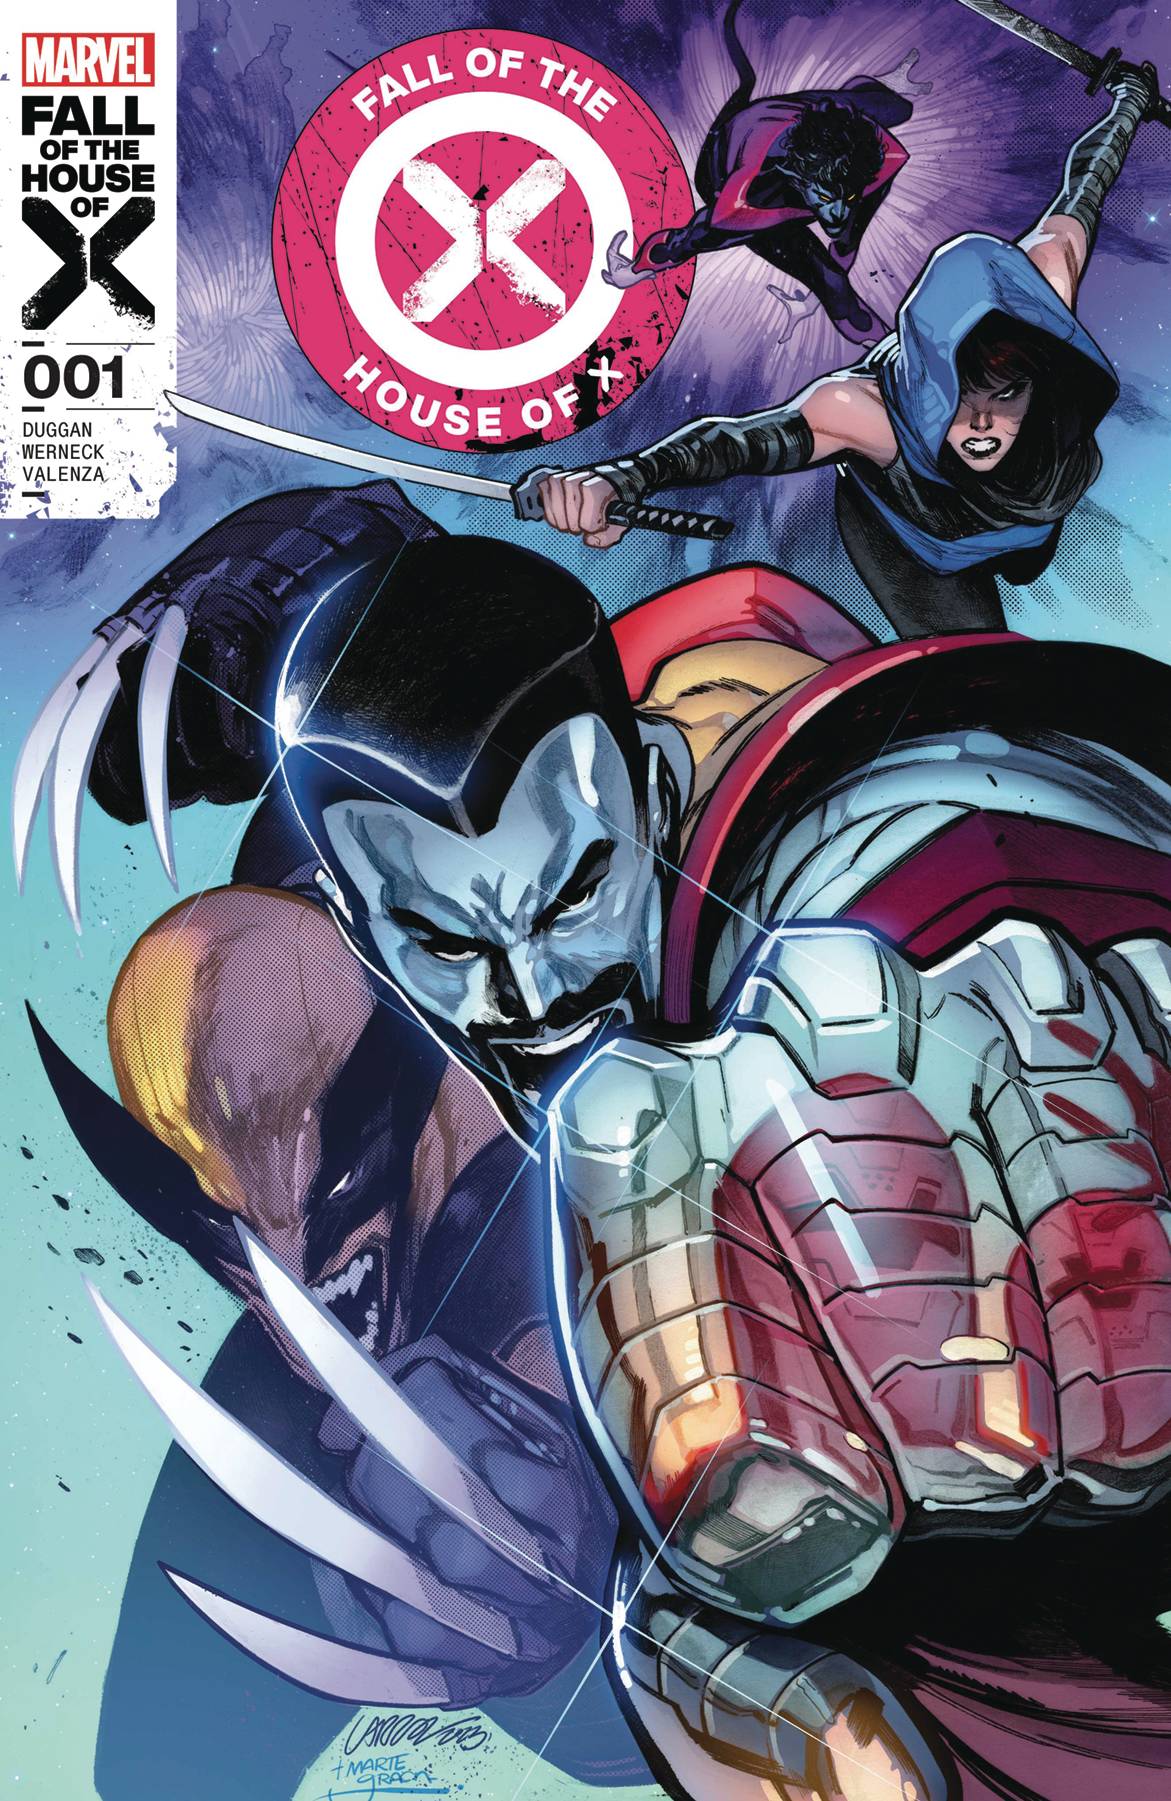 DF FALL OF HOUSE OF X #1 DUGGAN SGN